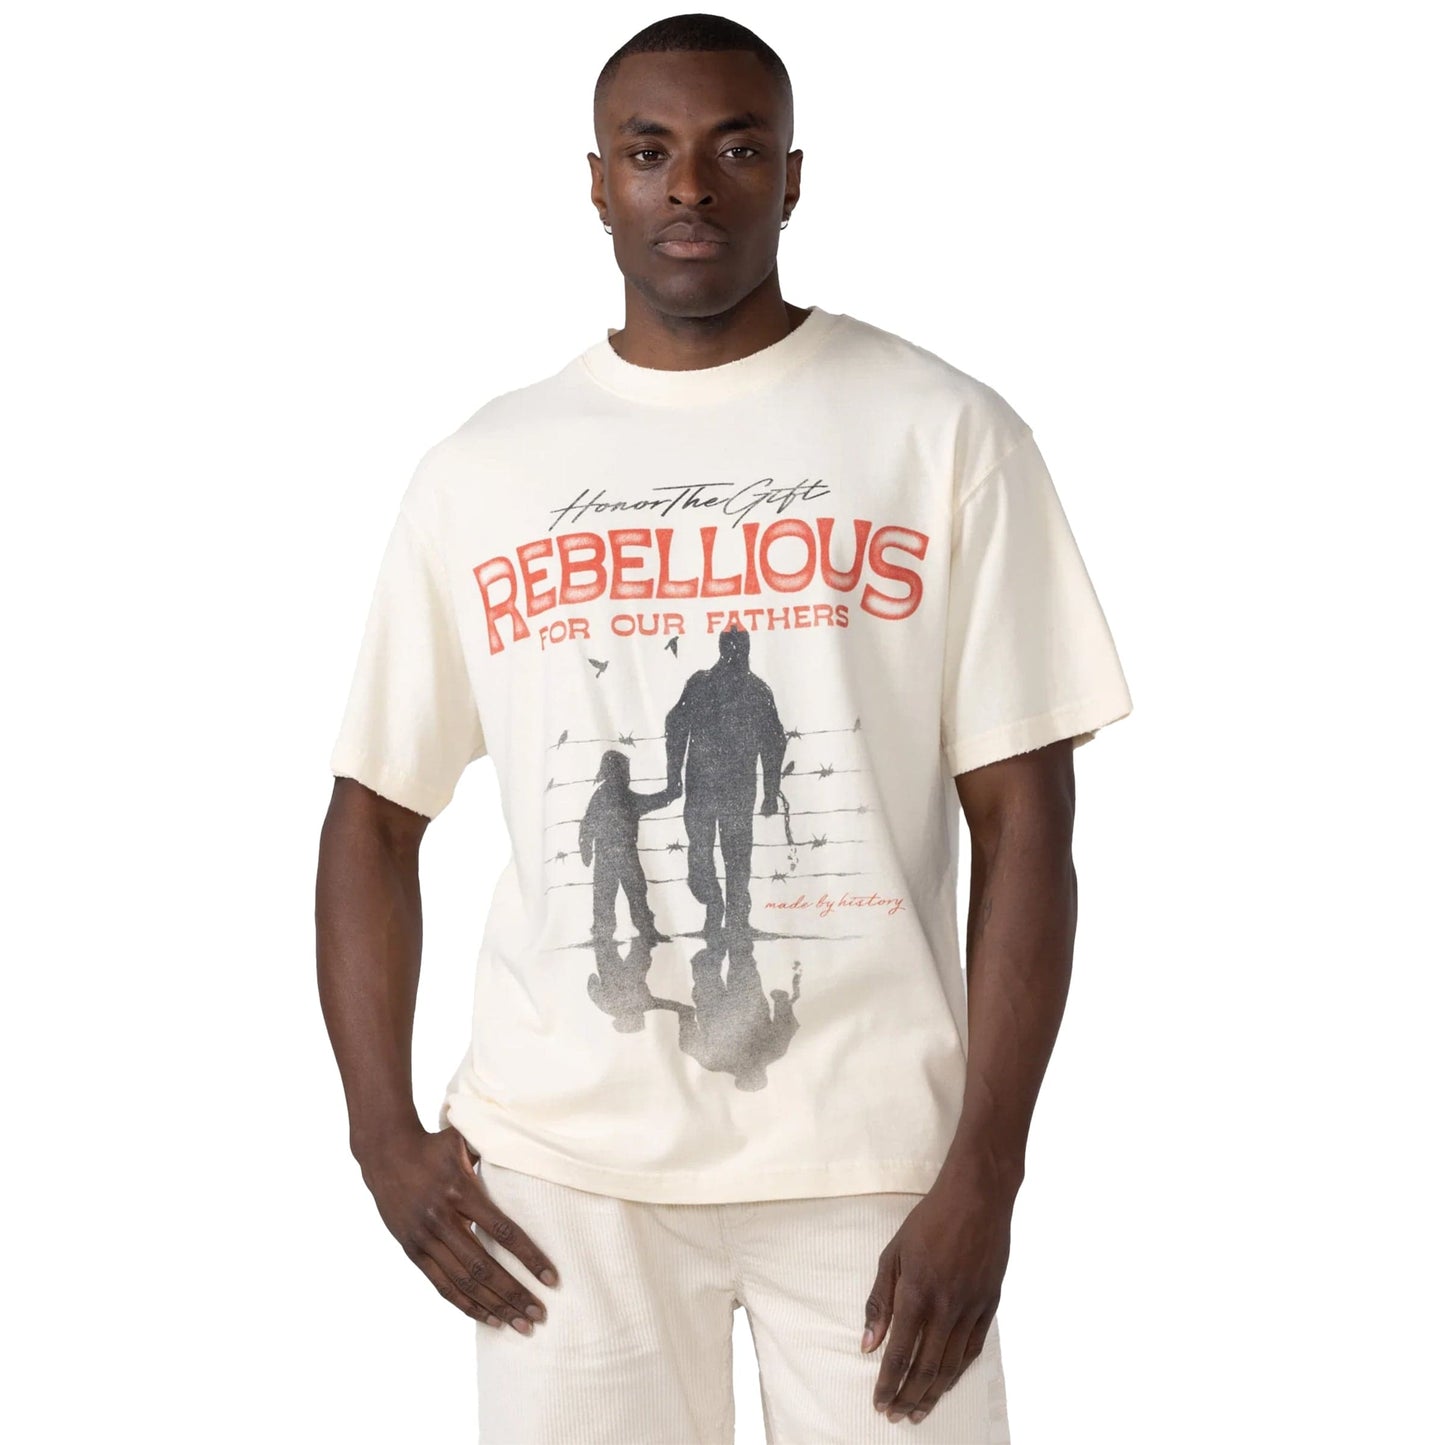 Honor The Gift T-Shirts REBELLIOUS FOR OUR FATHERS T-SHIRT